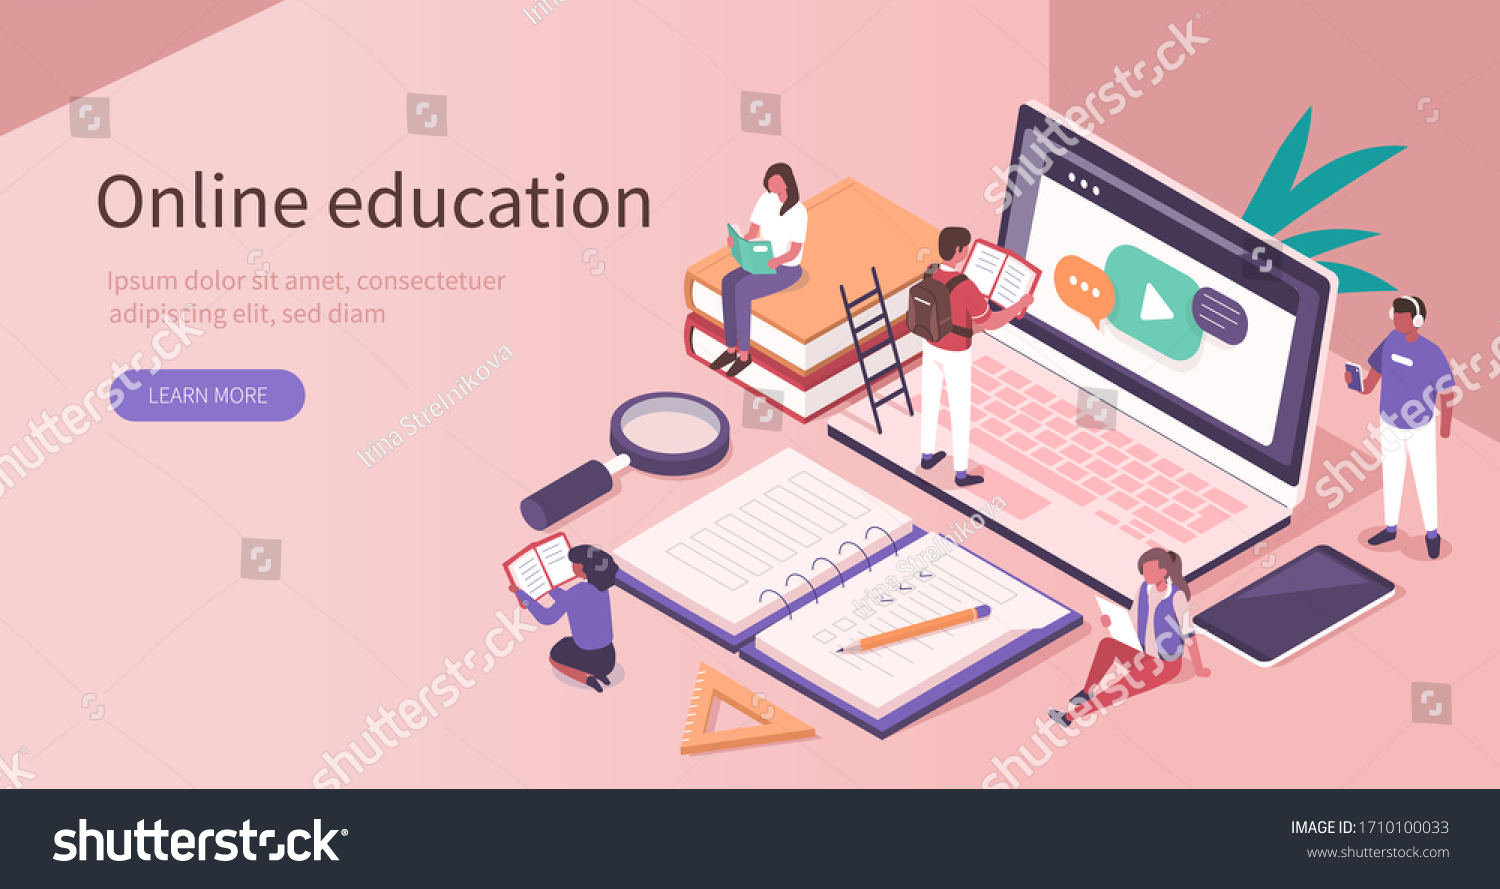 Students Learning Online at Home. People Characters  Looking at Laptop and Studying with Smartphone, Books and Exercise Books. Online Education Concept. Flat Isometric Vector  Illustration. #1710100033